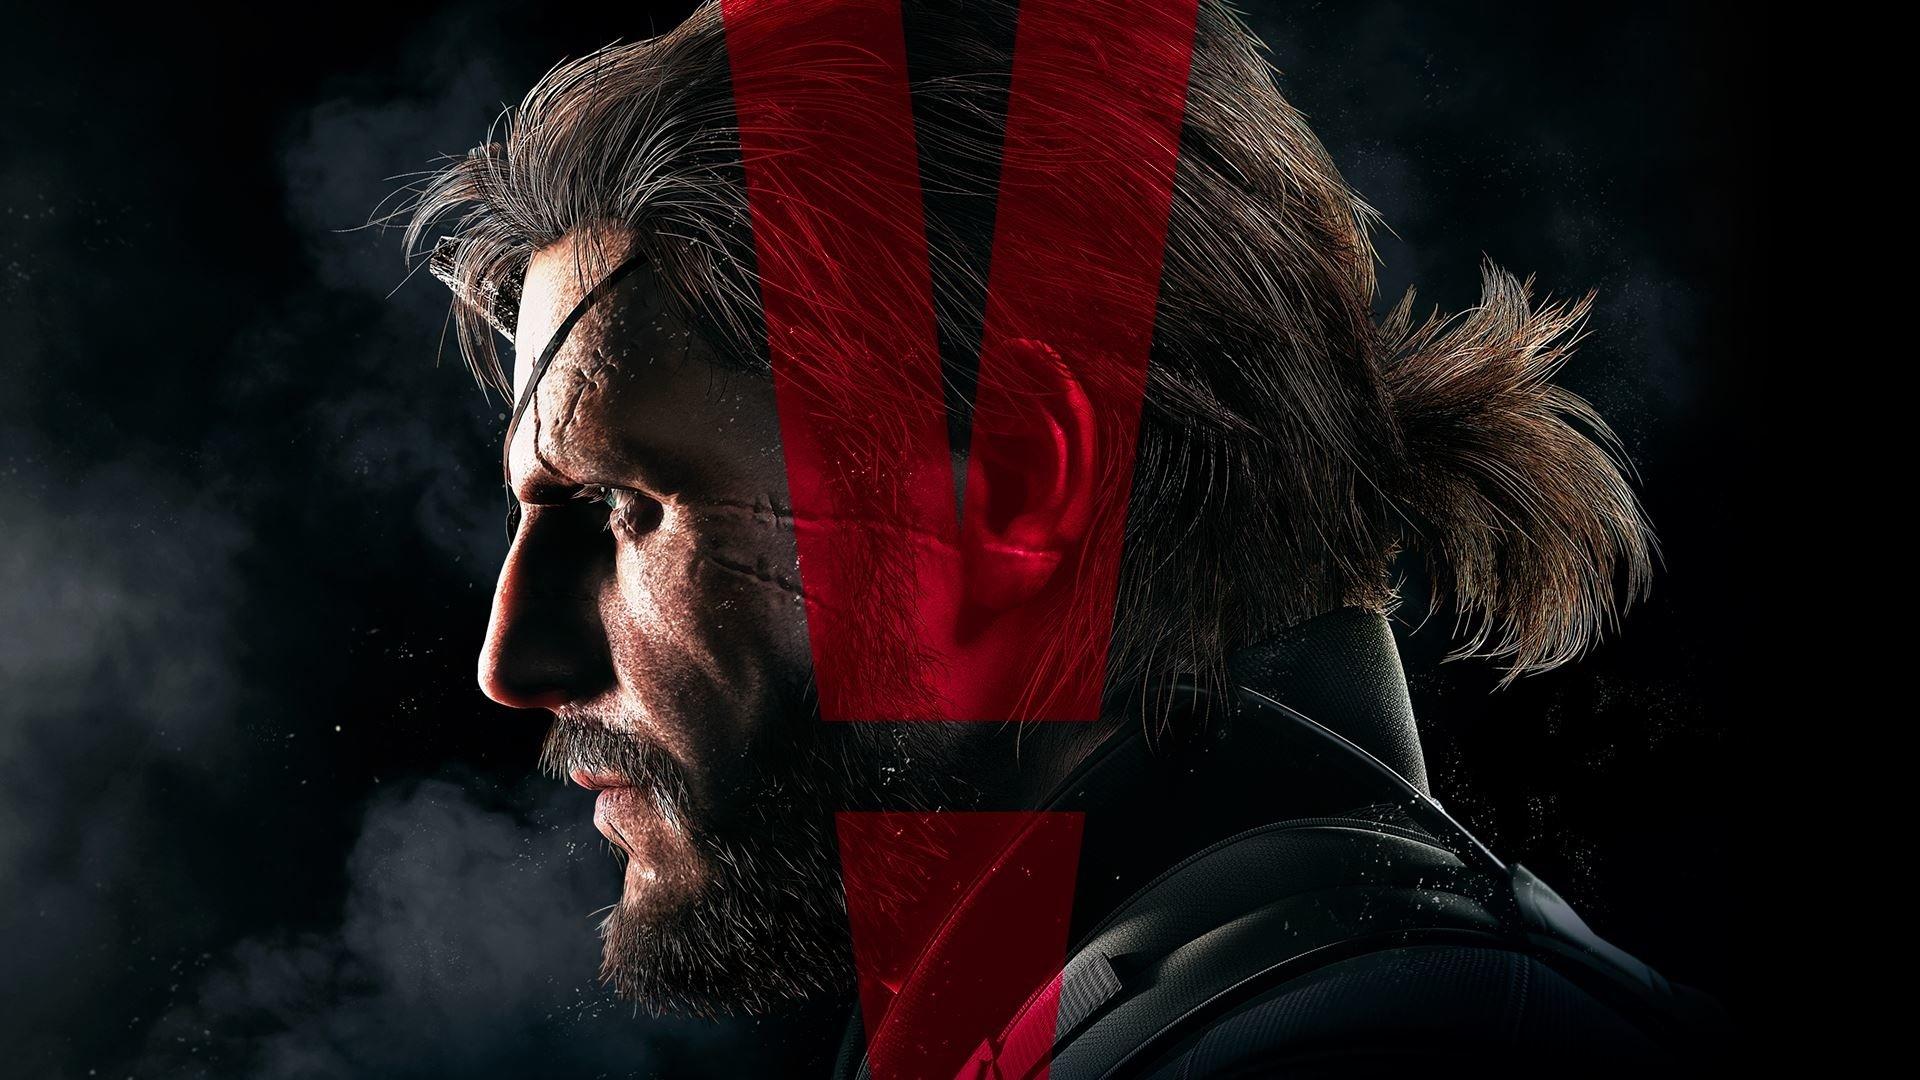 Metal Gear Solid V: The Phantom Pain HD Wallpaper and Background